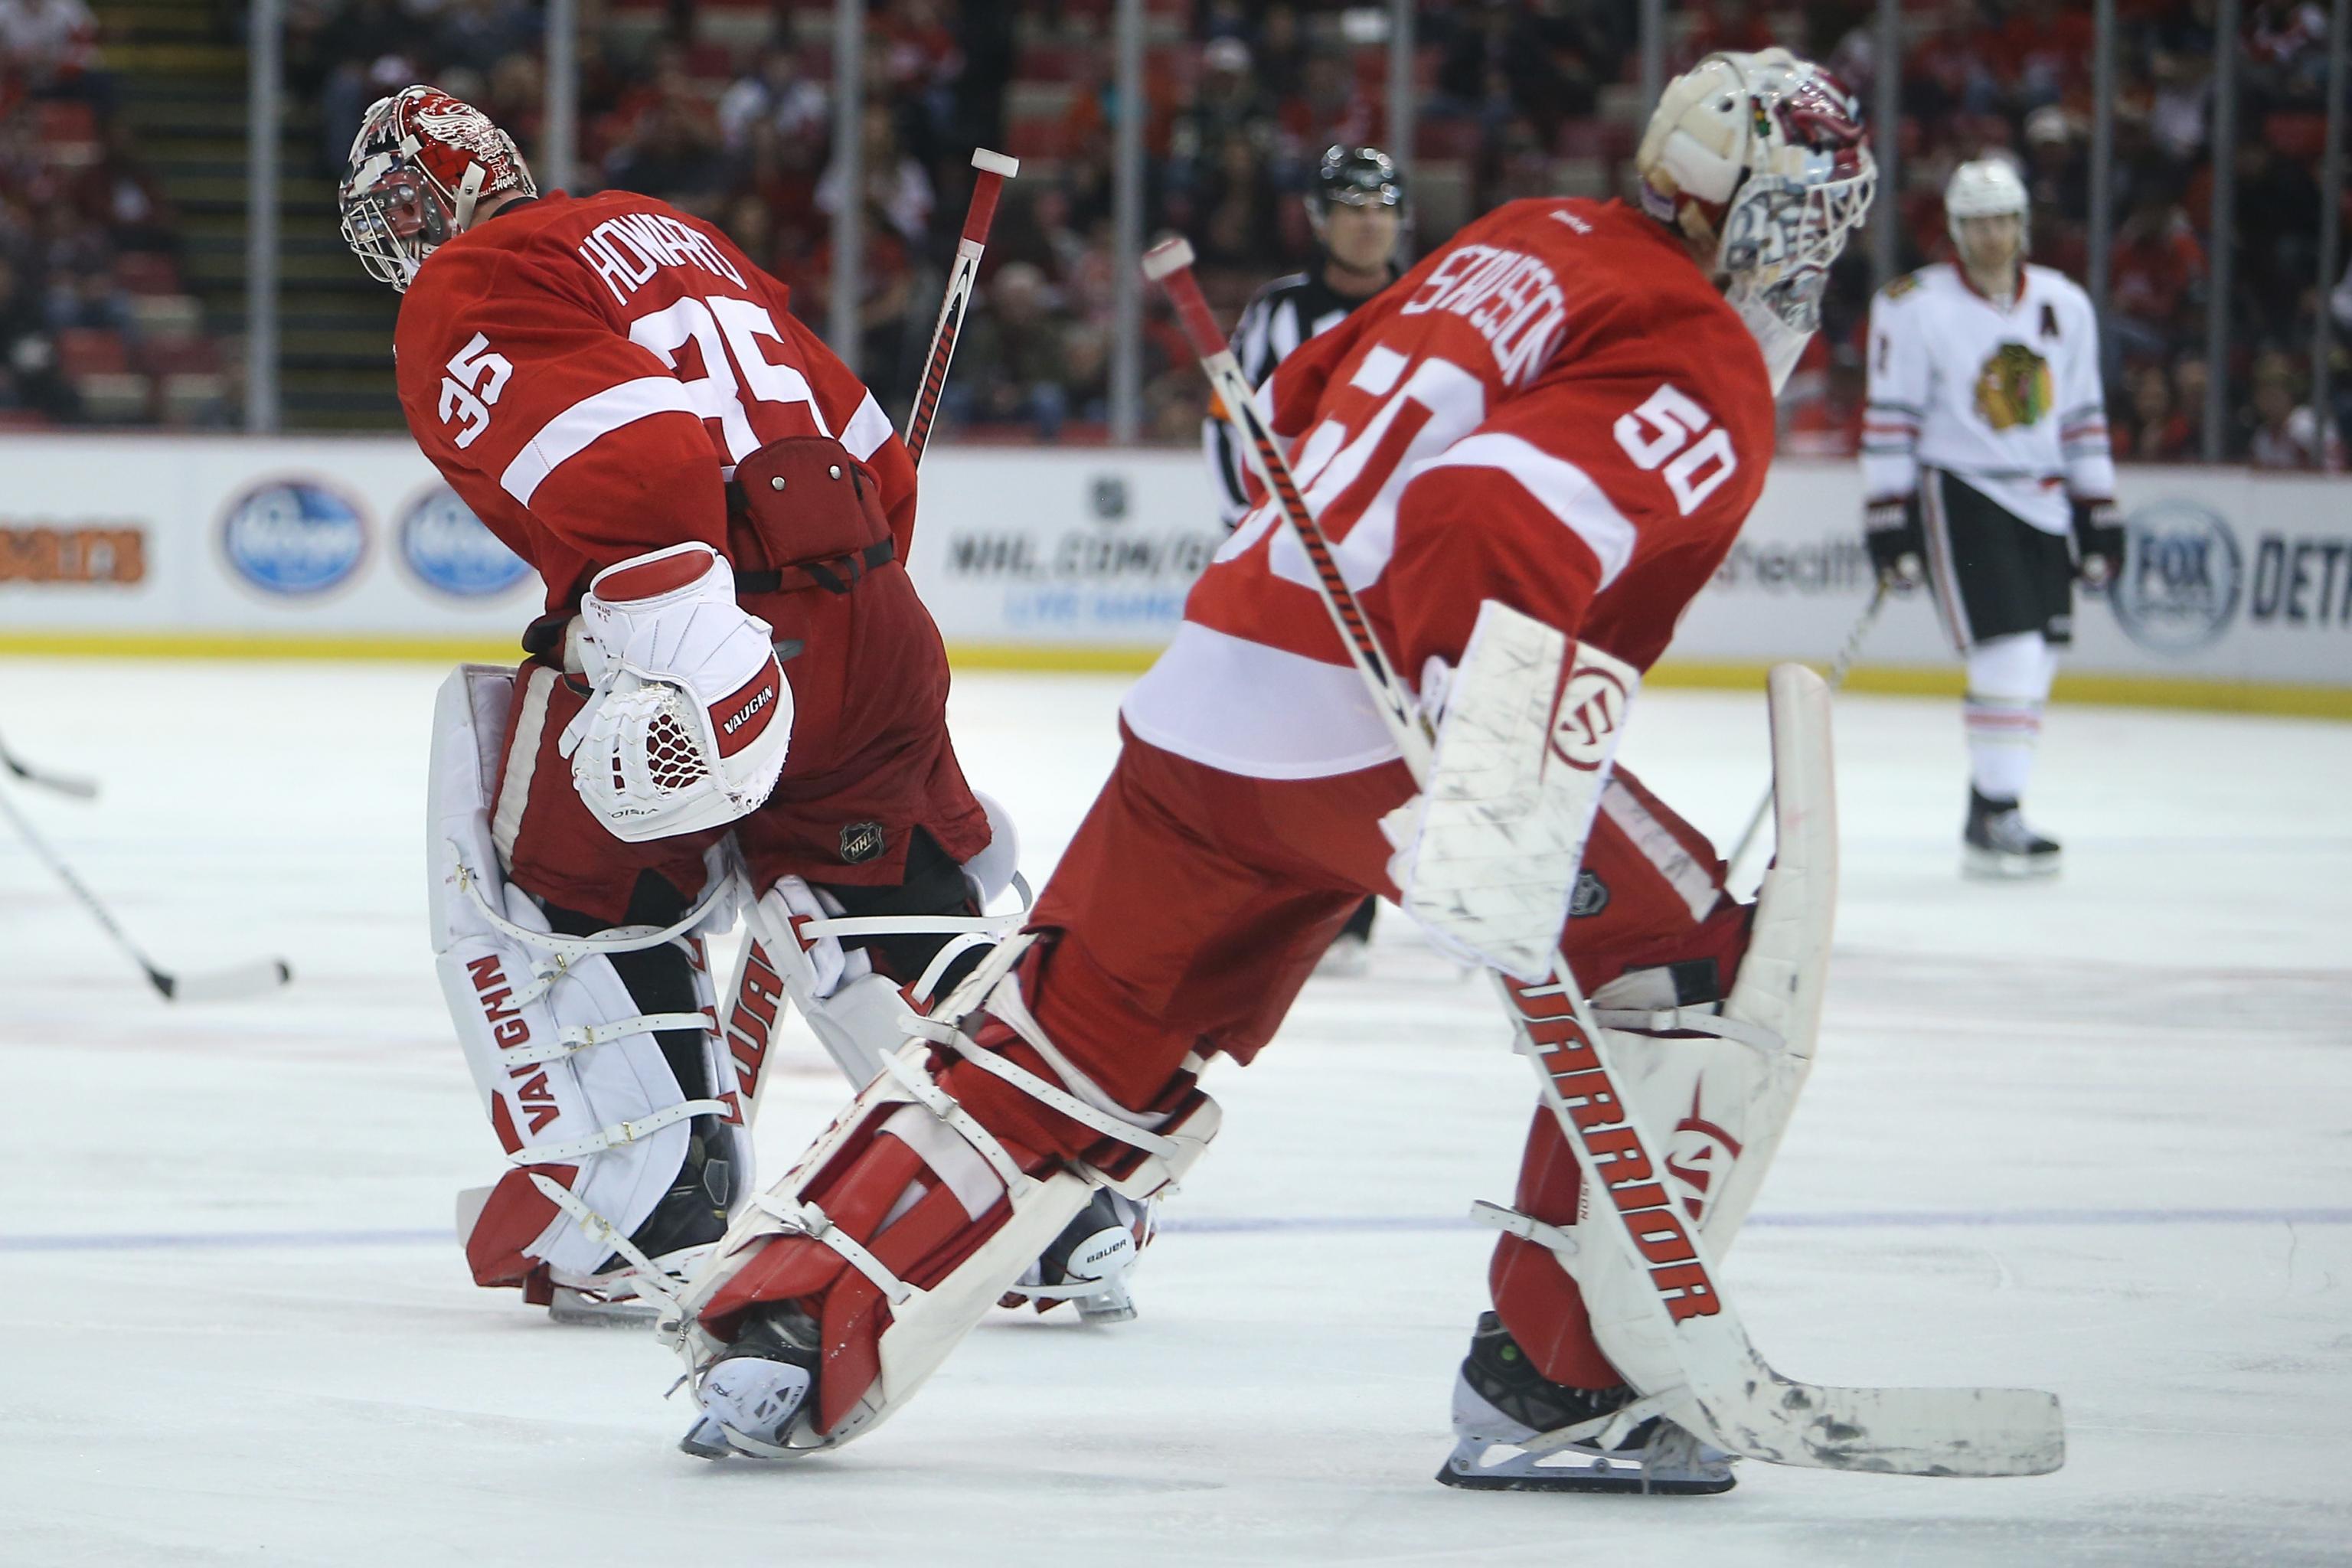 Red Wings goalie does not deserve Hall honor